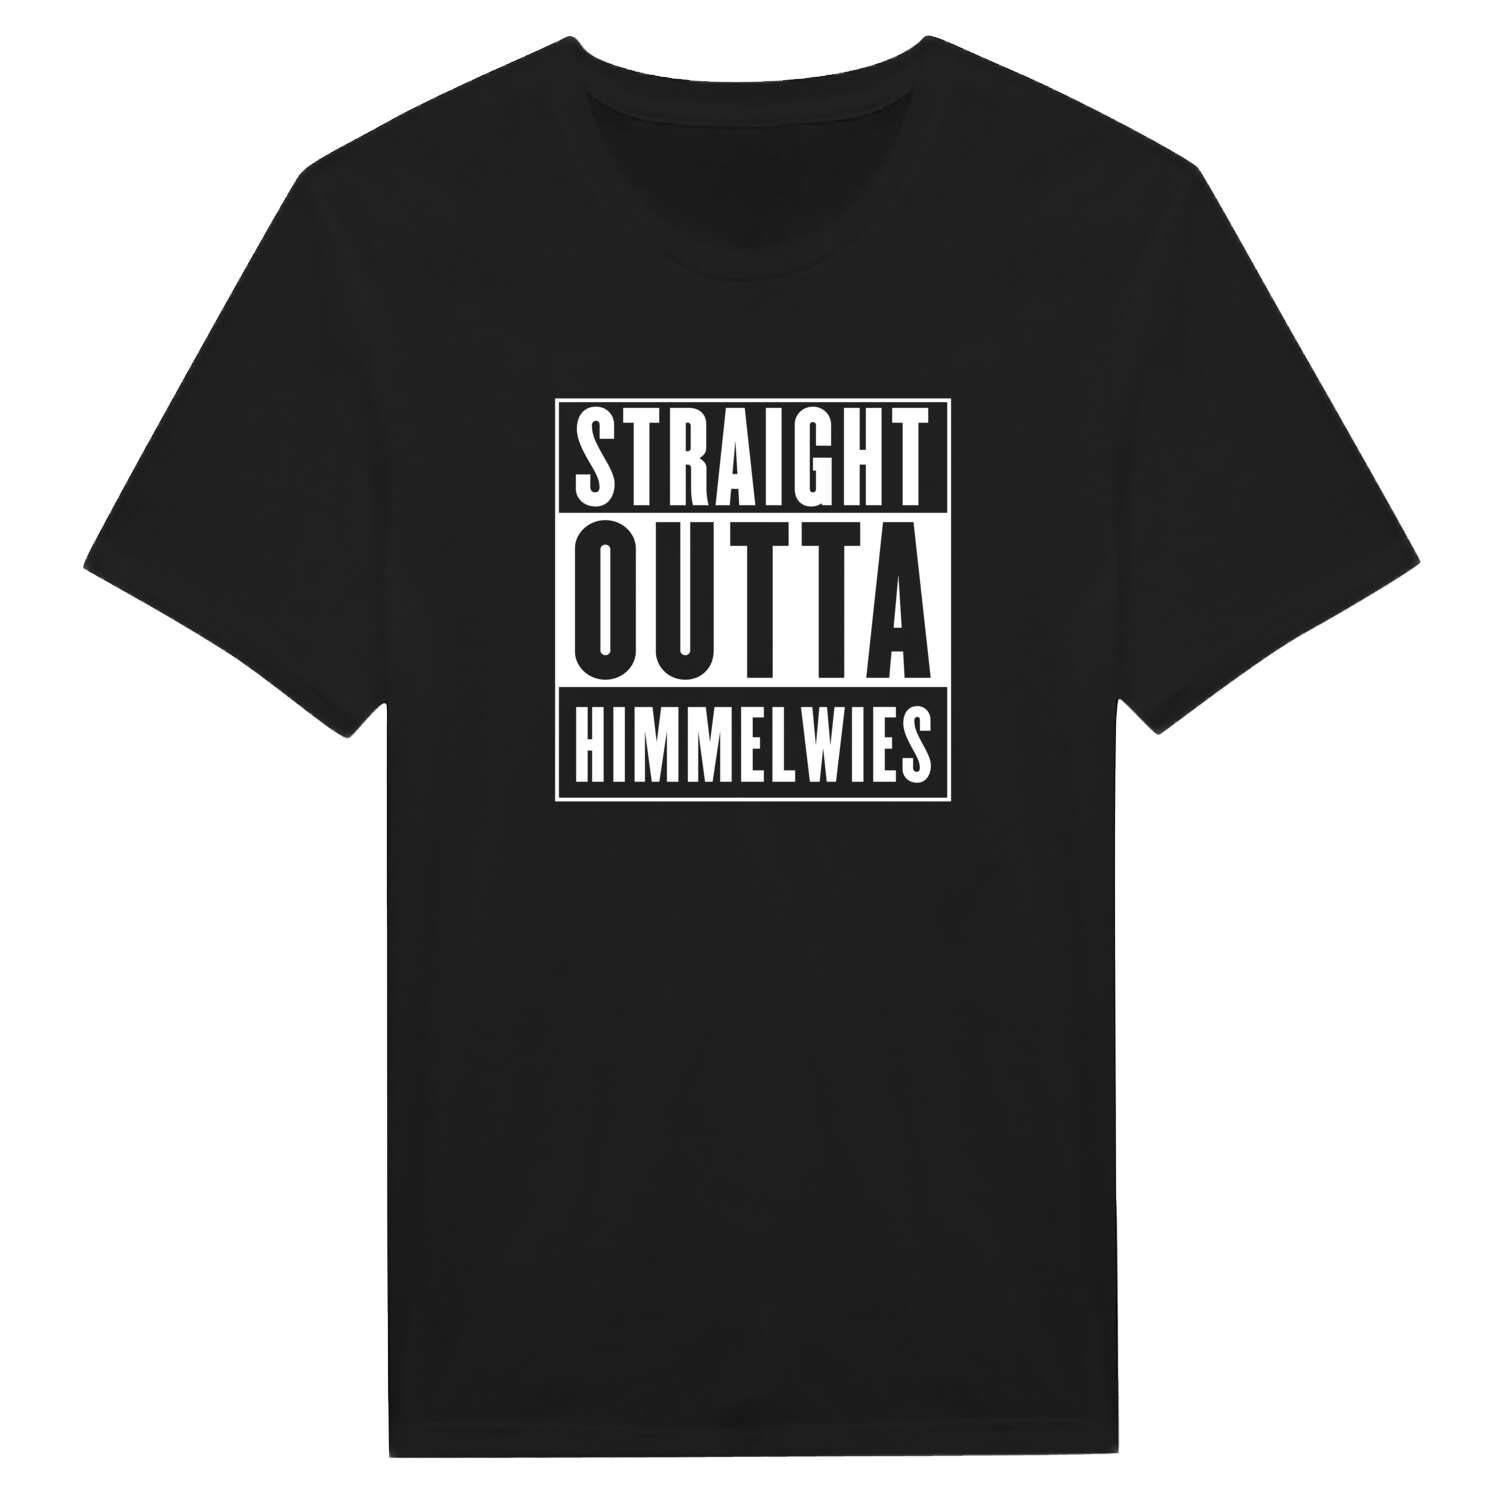 Himmelwies T-Shirt »Straight Outta«